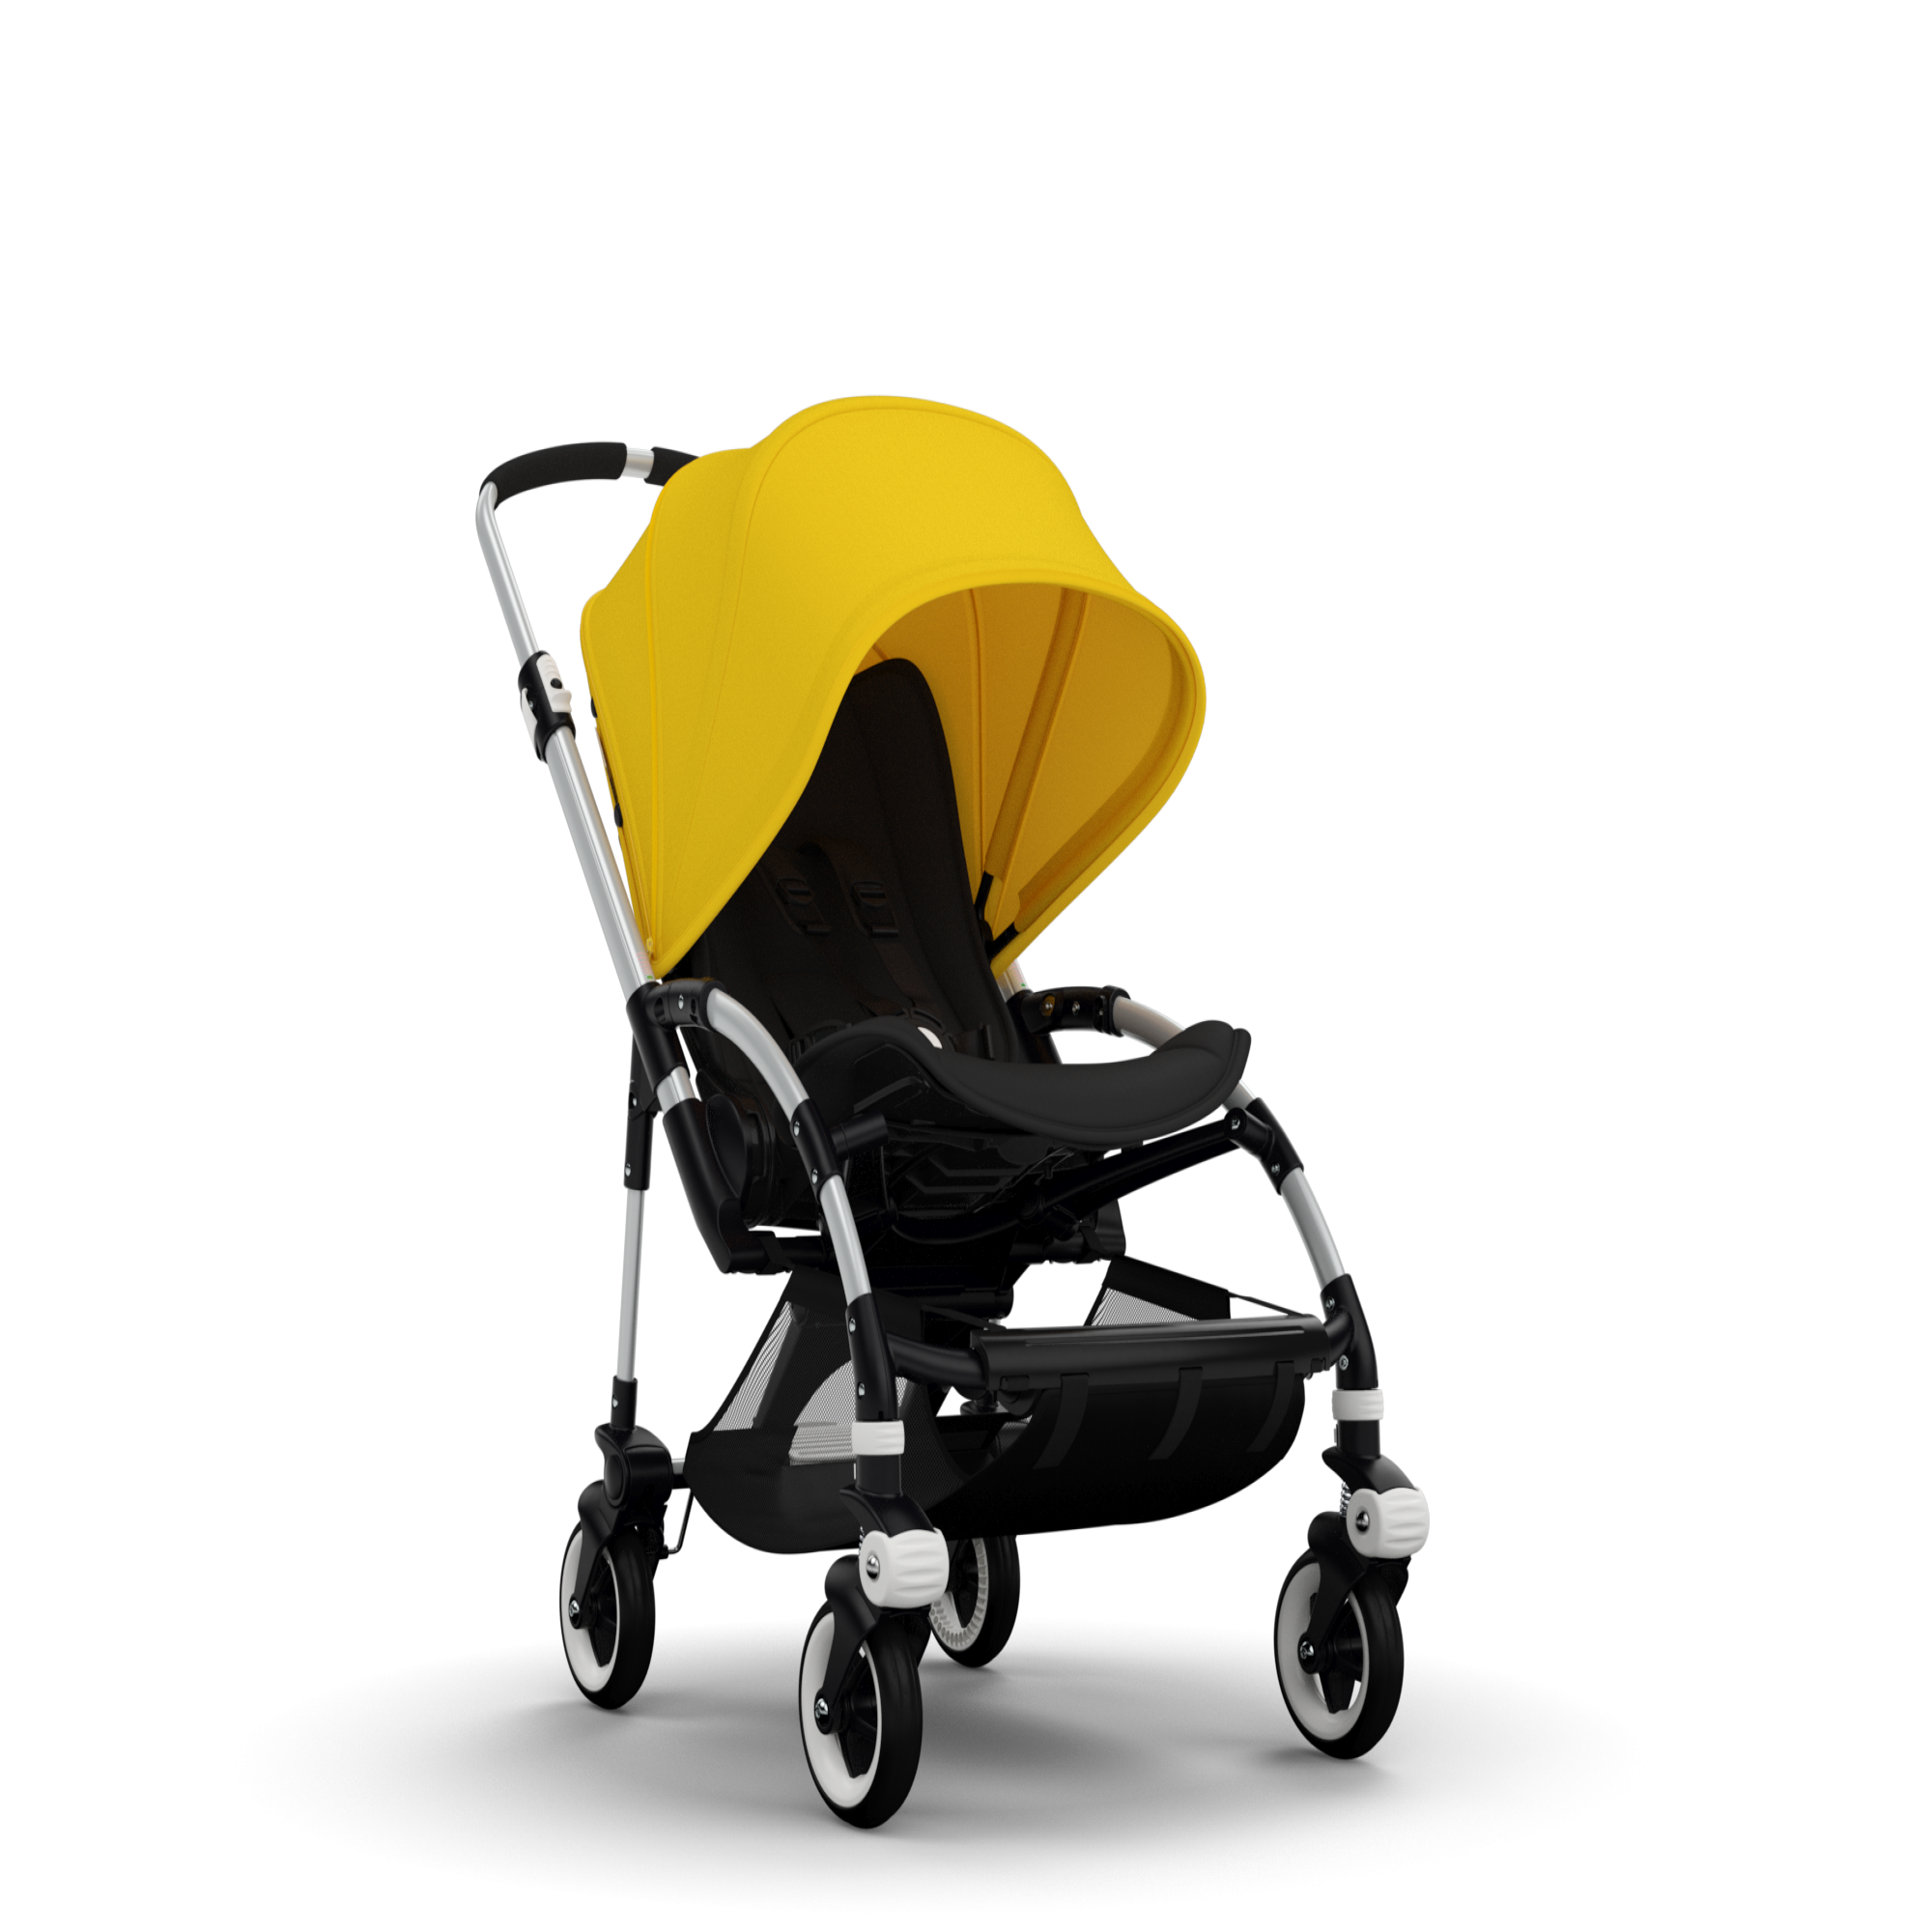 bugaboo bee outlet